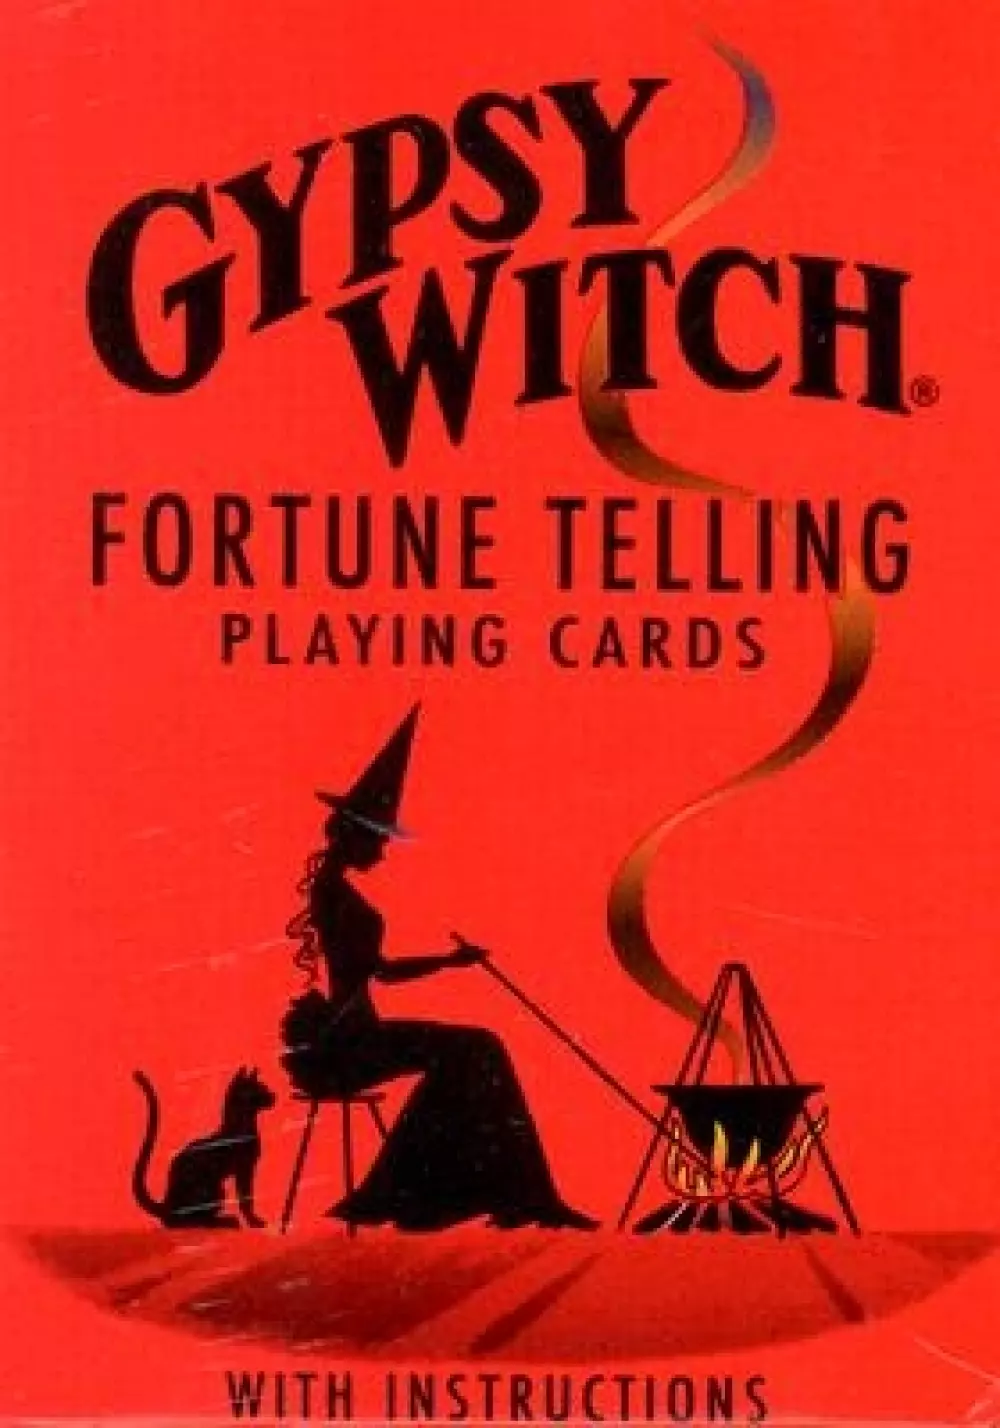 Gypsy Witch Fortune Telling, Tarot & orakel, Andre kort, Playing Cards